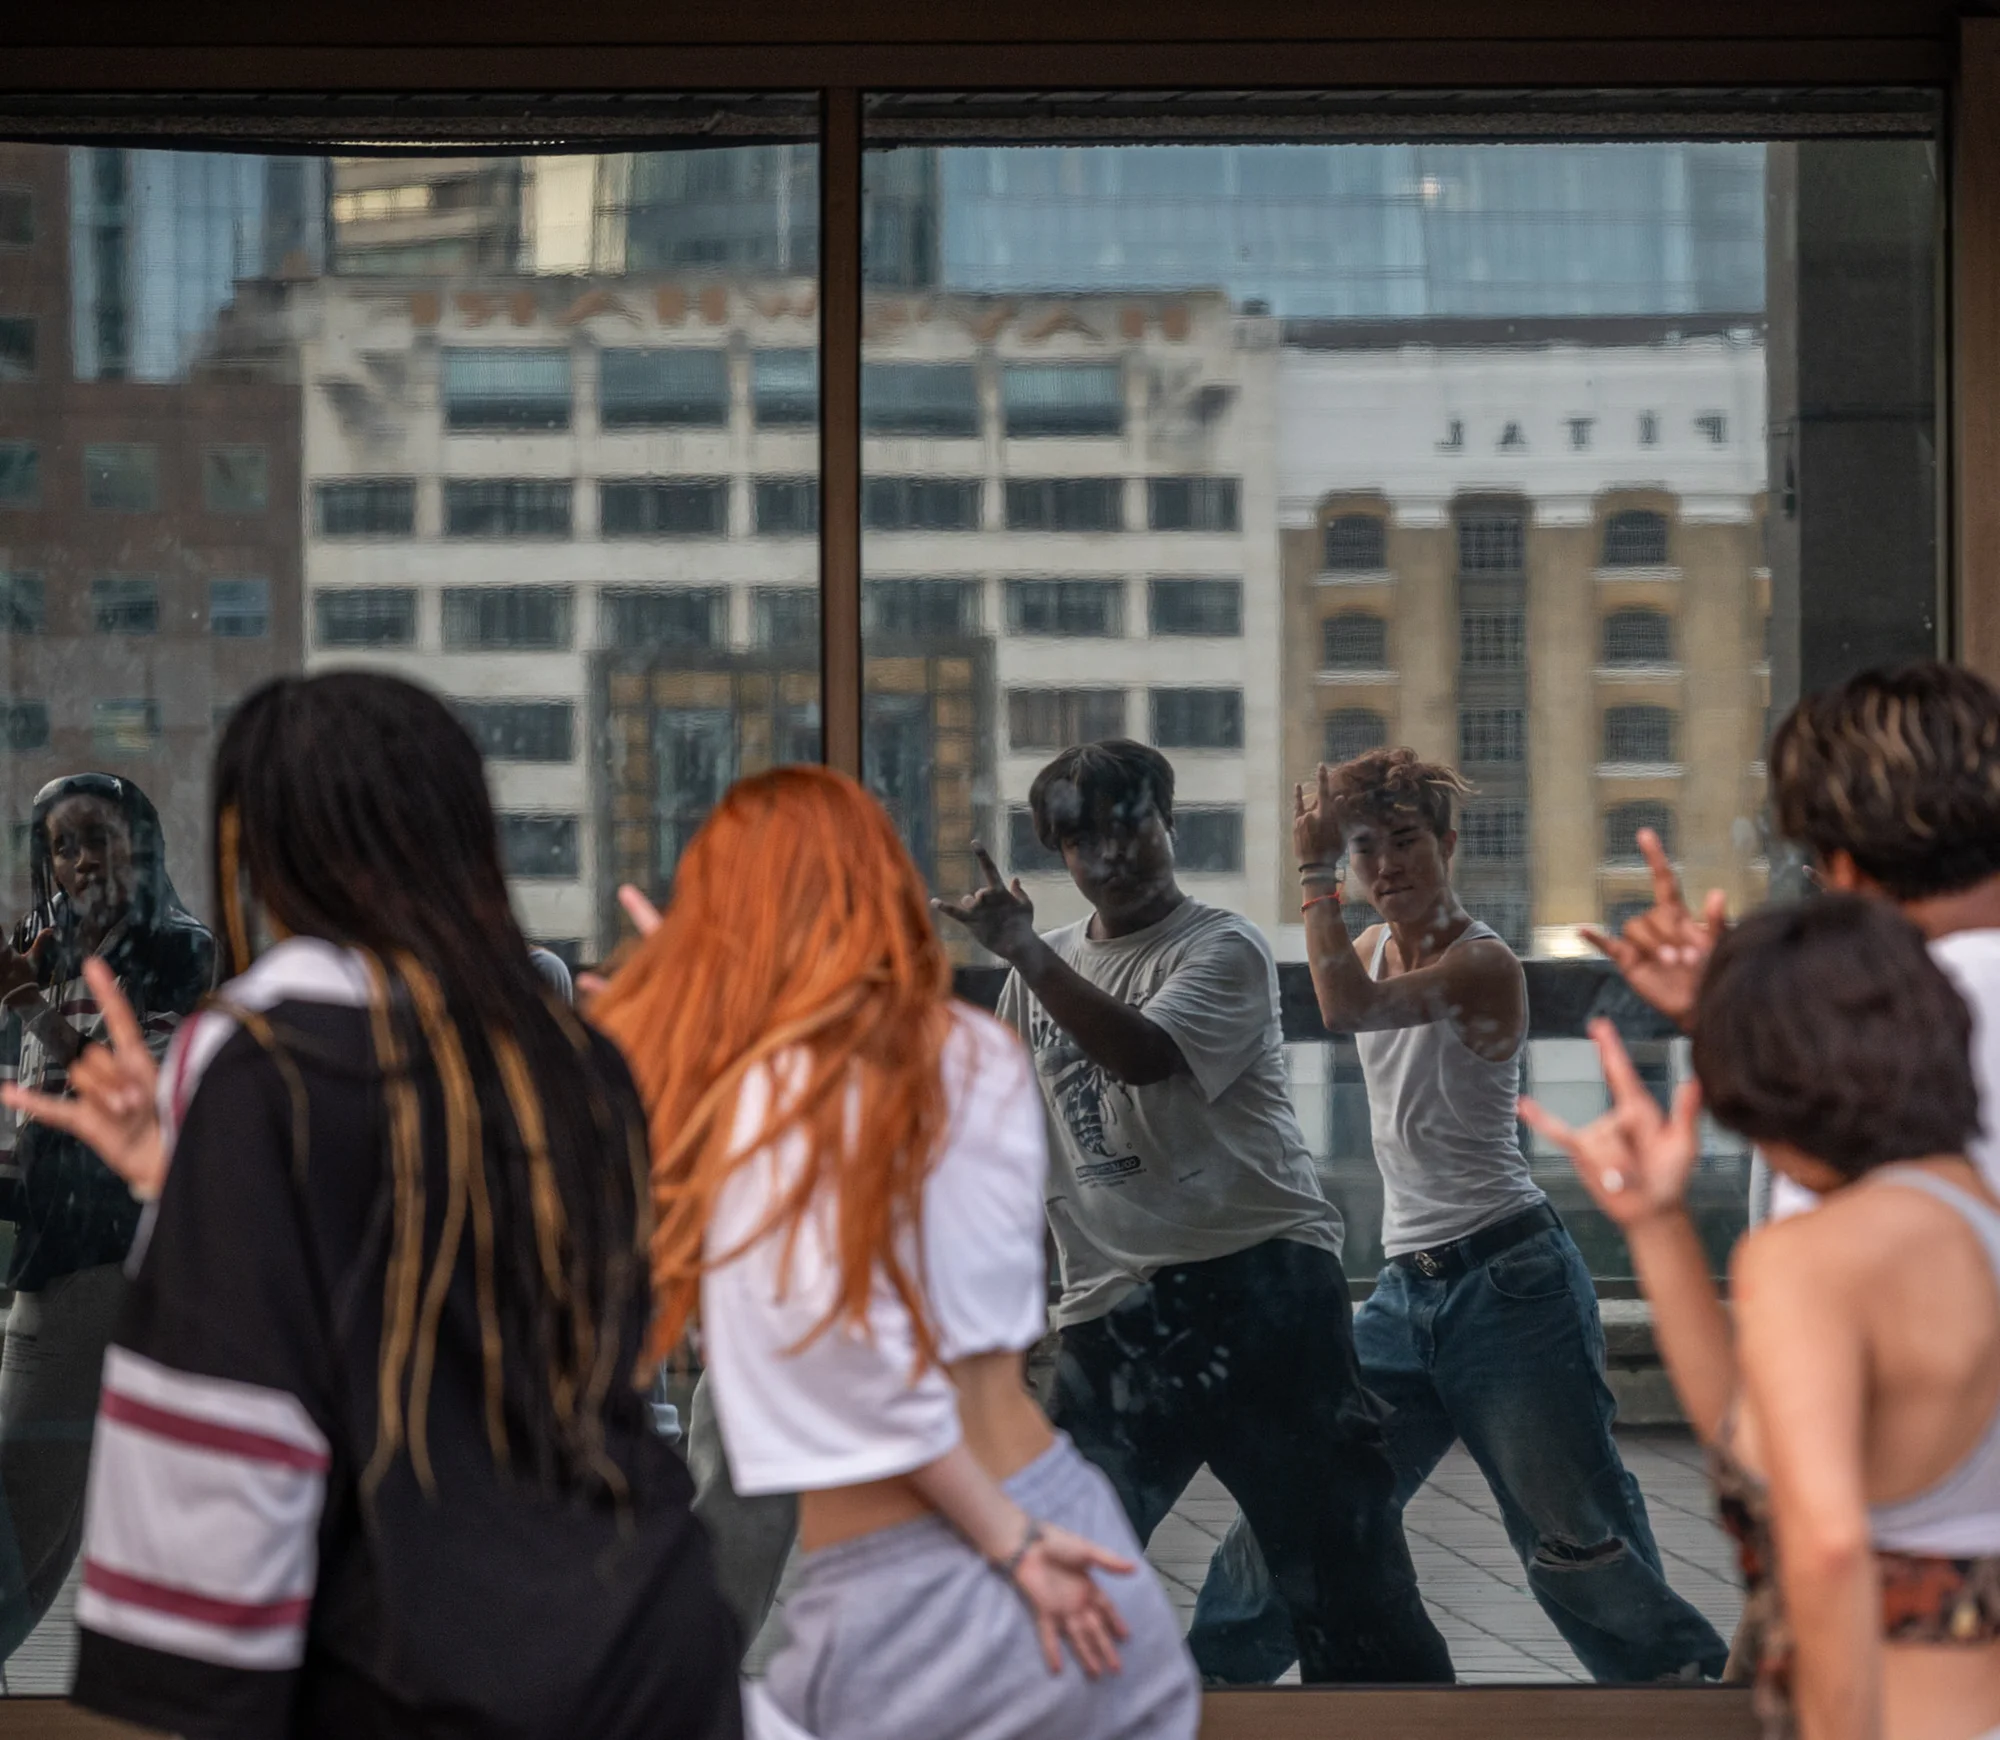 Cool young dancers practicing a routine in an office window